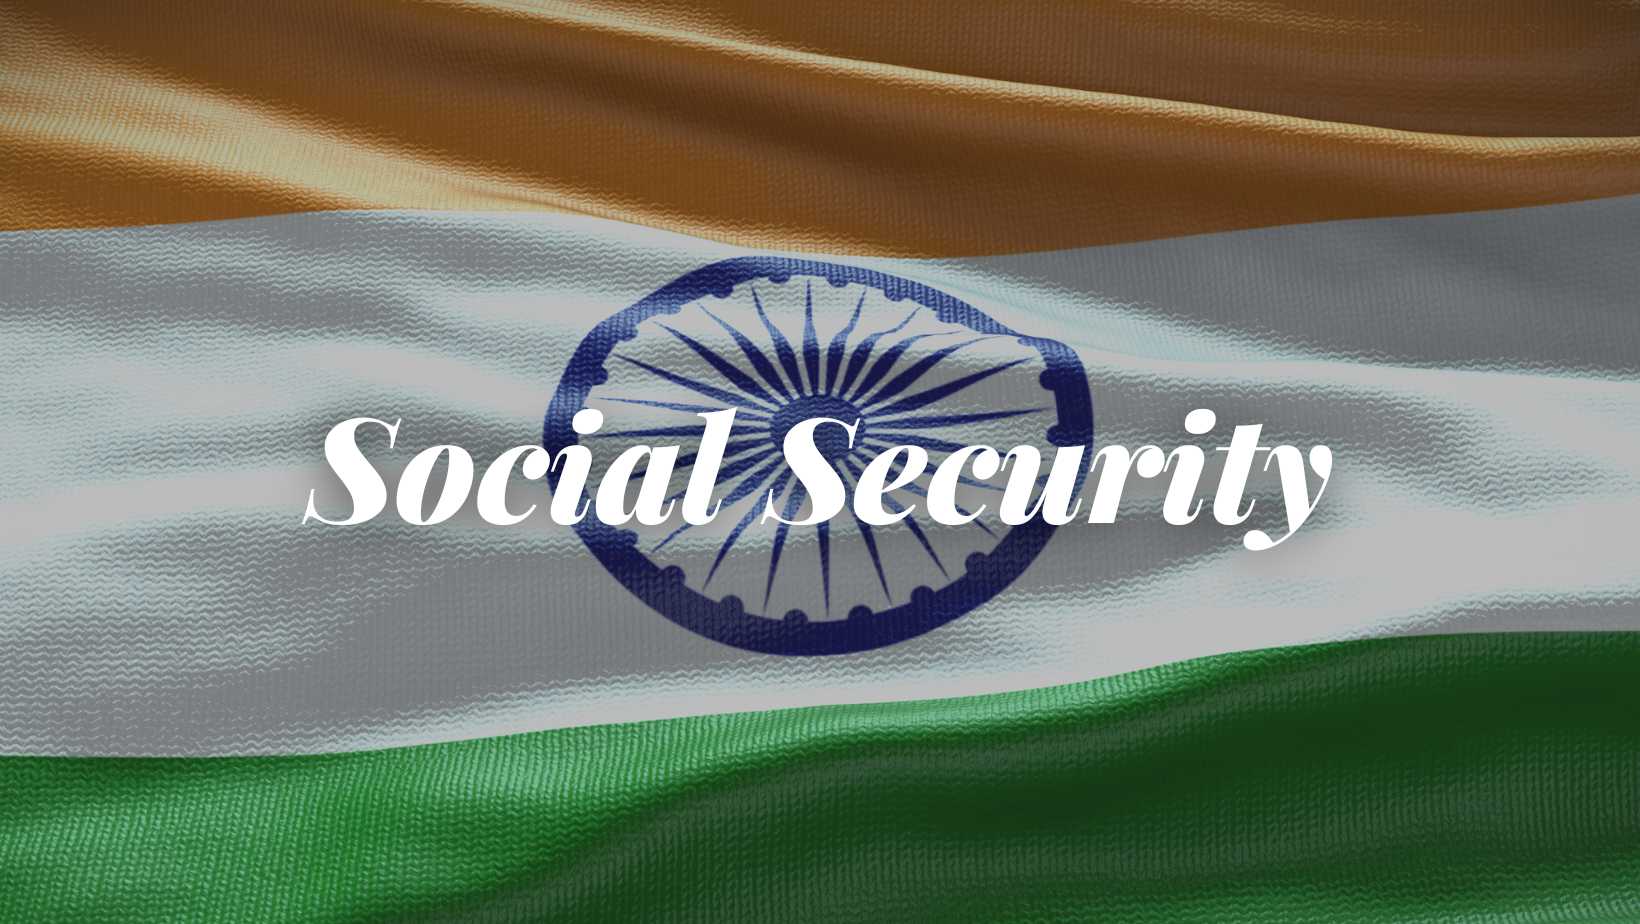 Social Security, The Great Motivator And Elixir Of Life In Value Chain